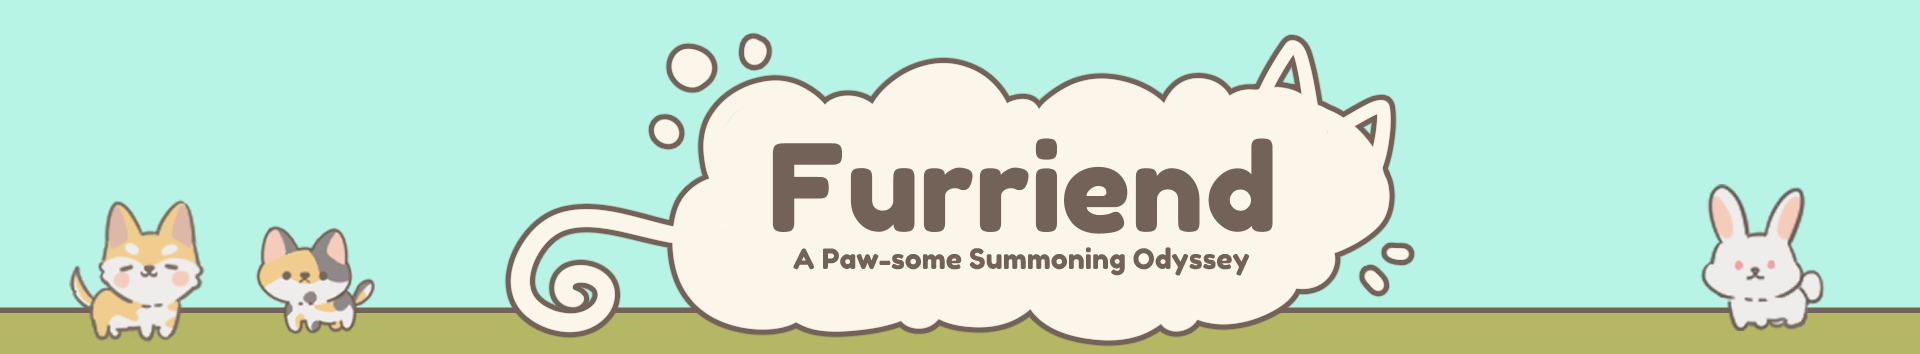 Furriend: A Paw-some Summoning Odyssey